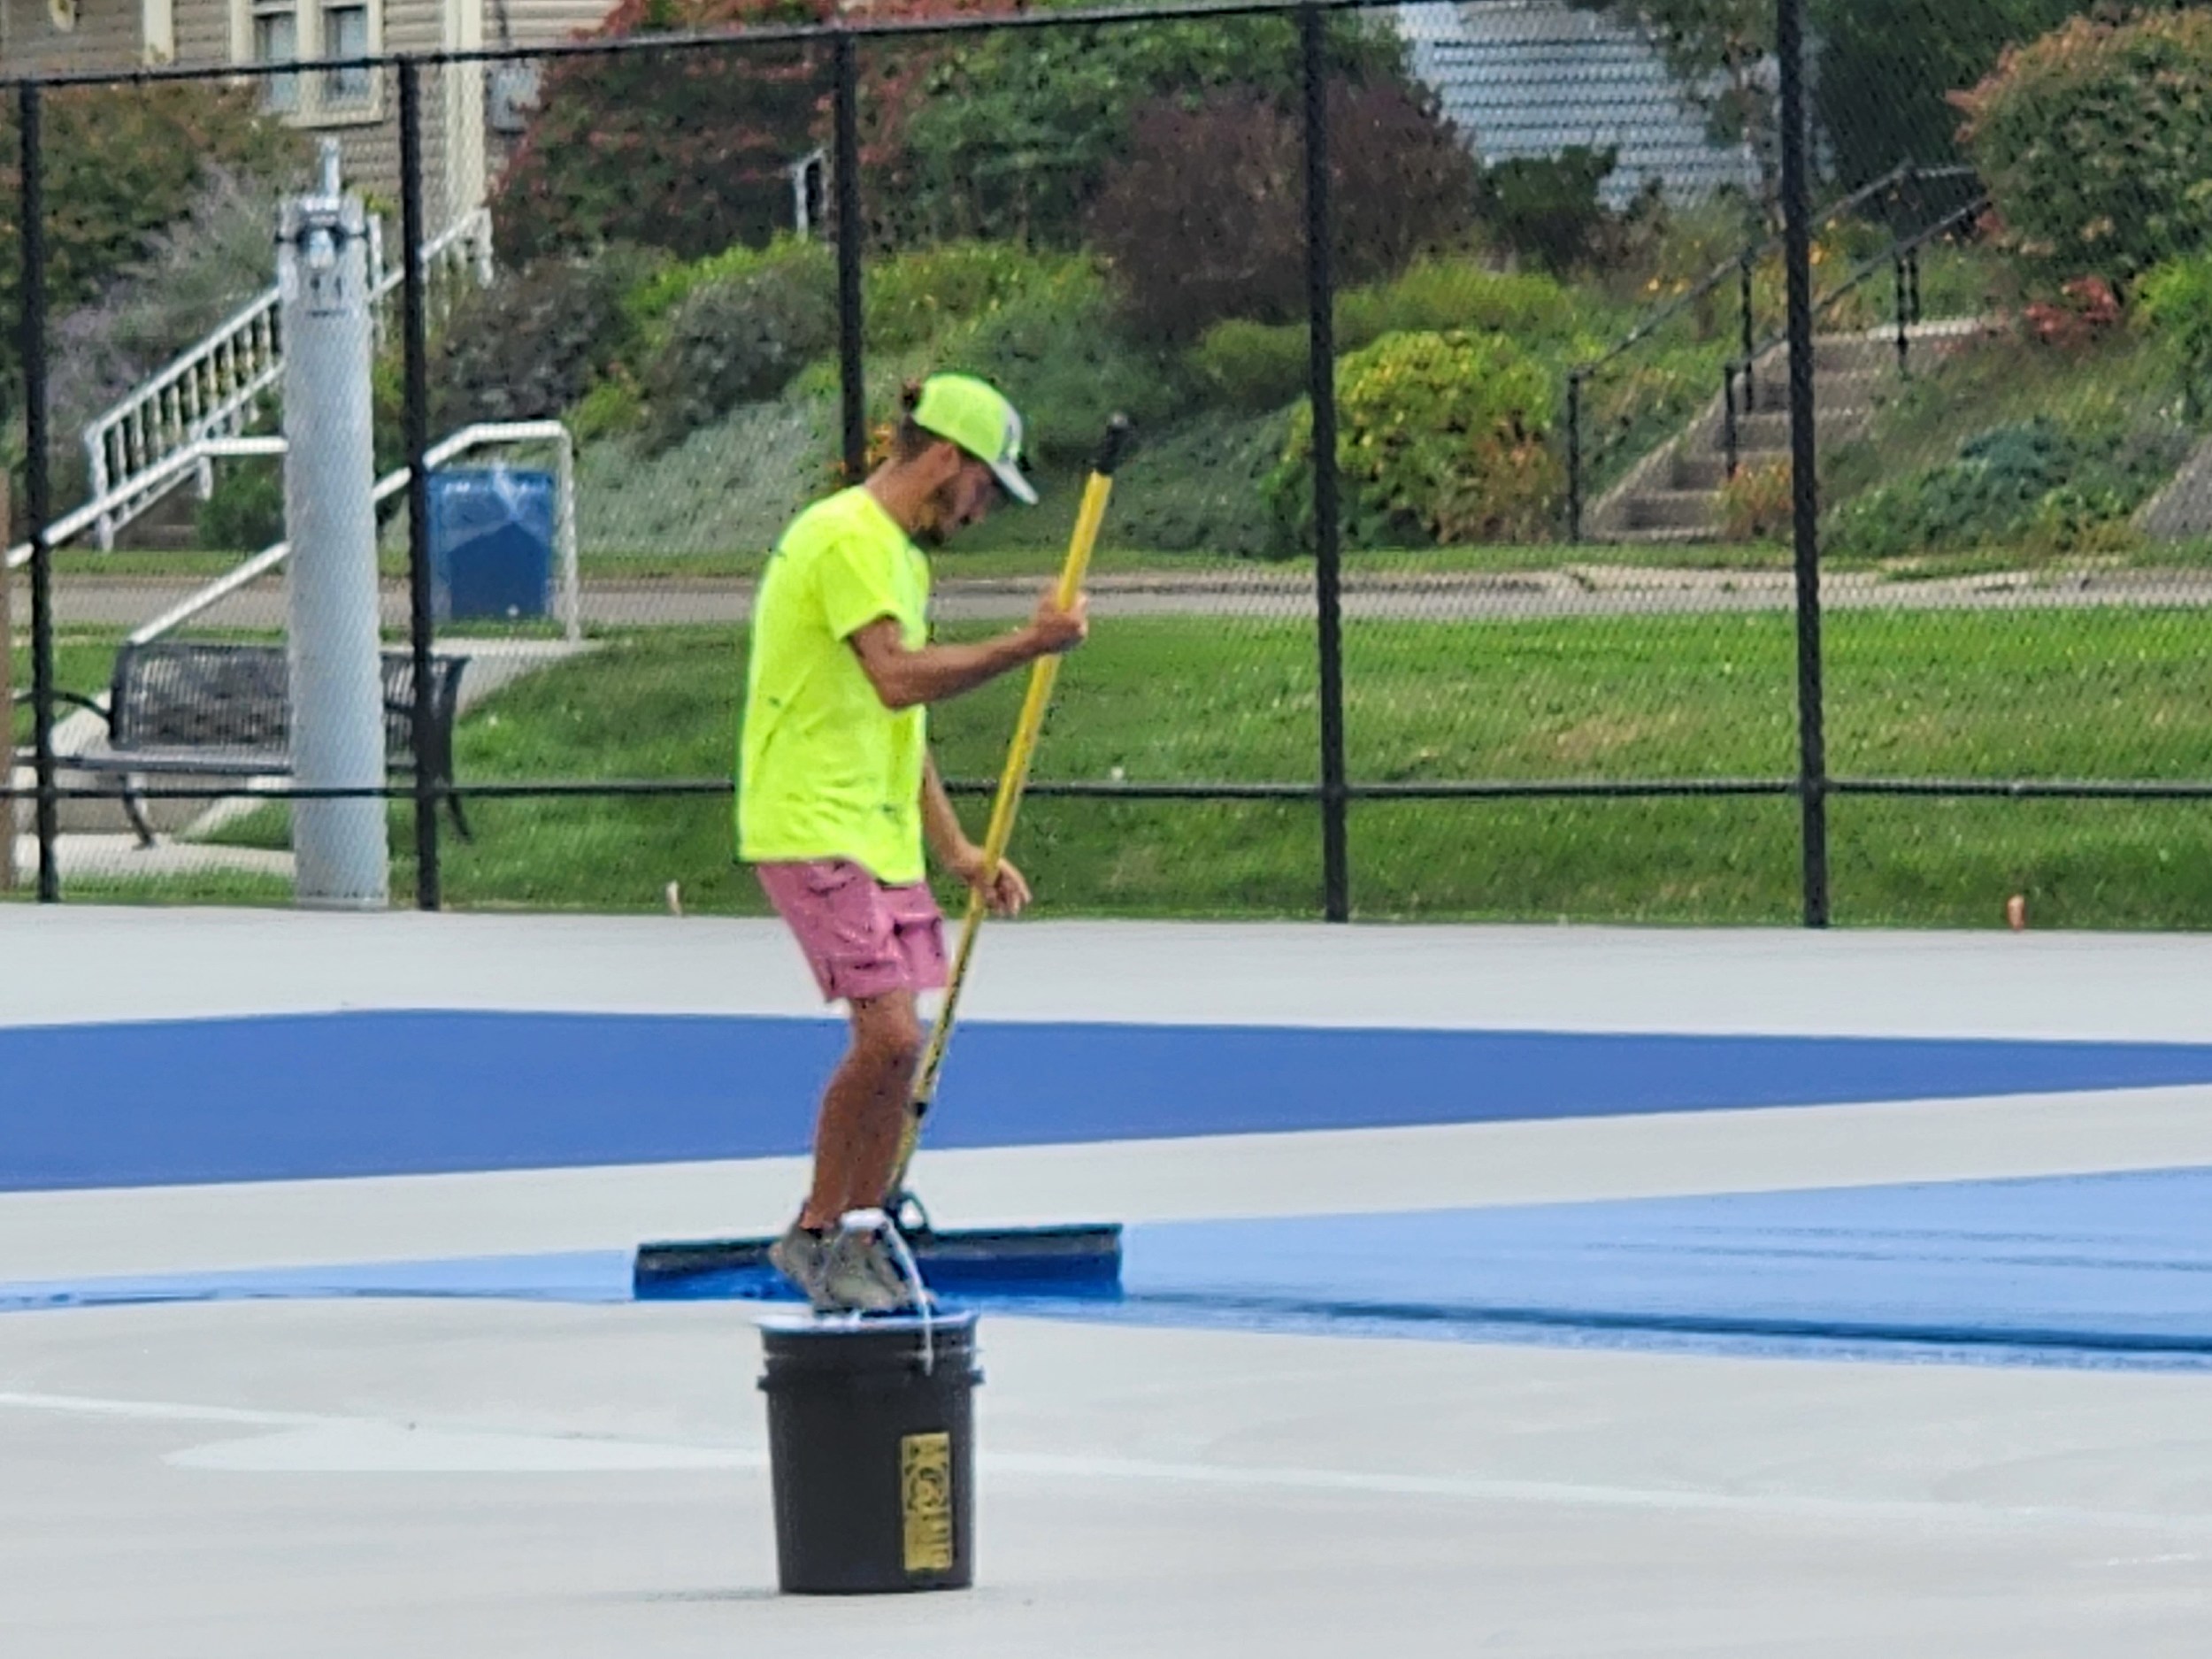 Rec Park Tennis Courts May Finally Open for Play This Month image picture